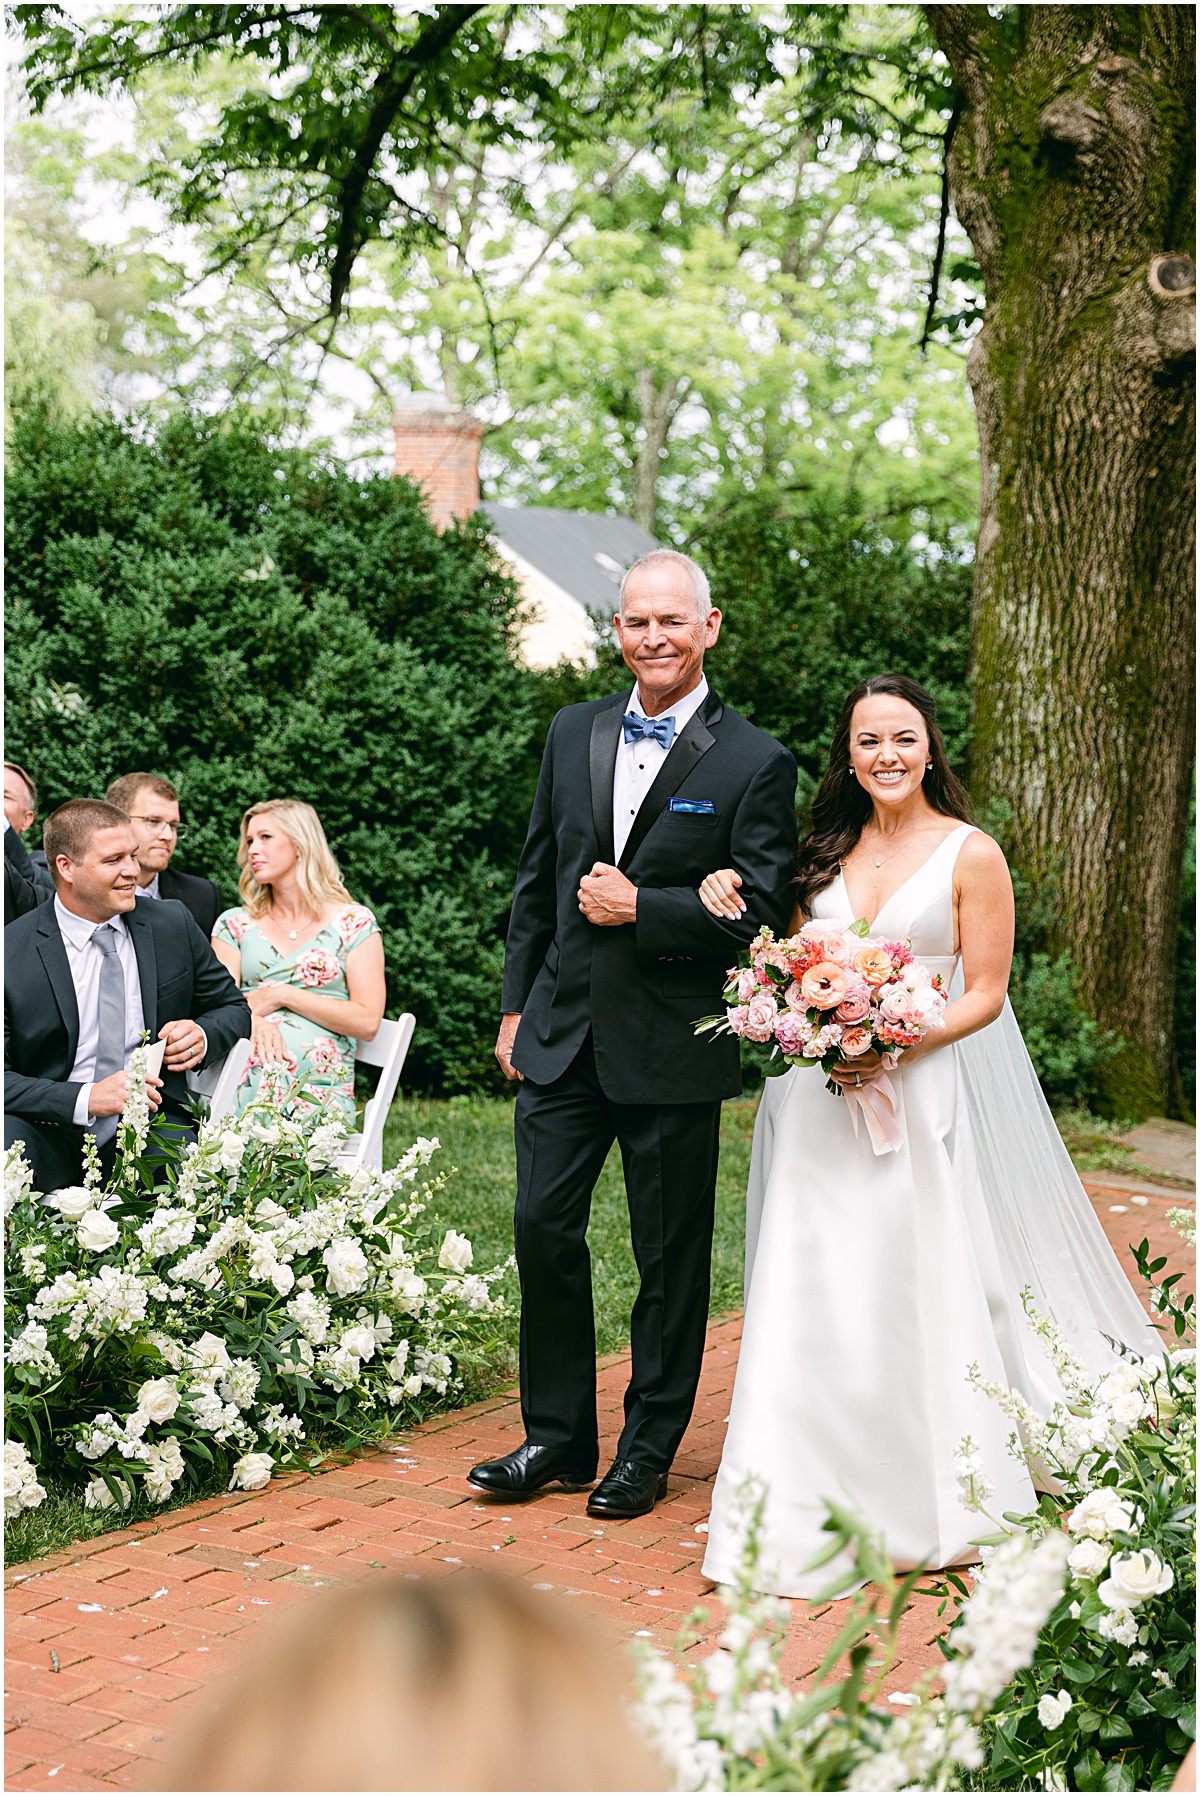 Joyful summer wedding at the Inn at Willow Grove by Sarah Bradshaw. Planning by Kelley Cannon Events.